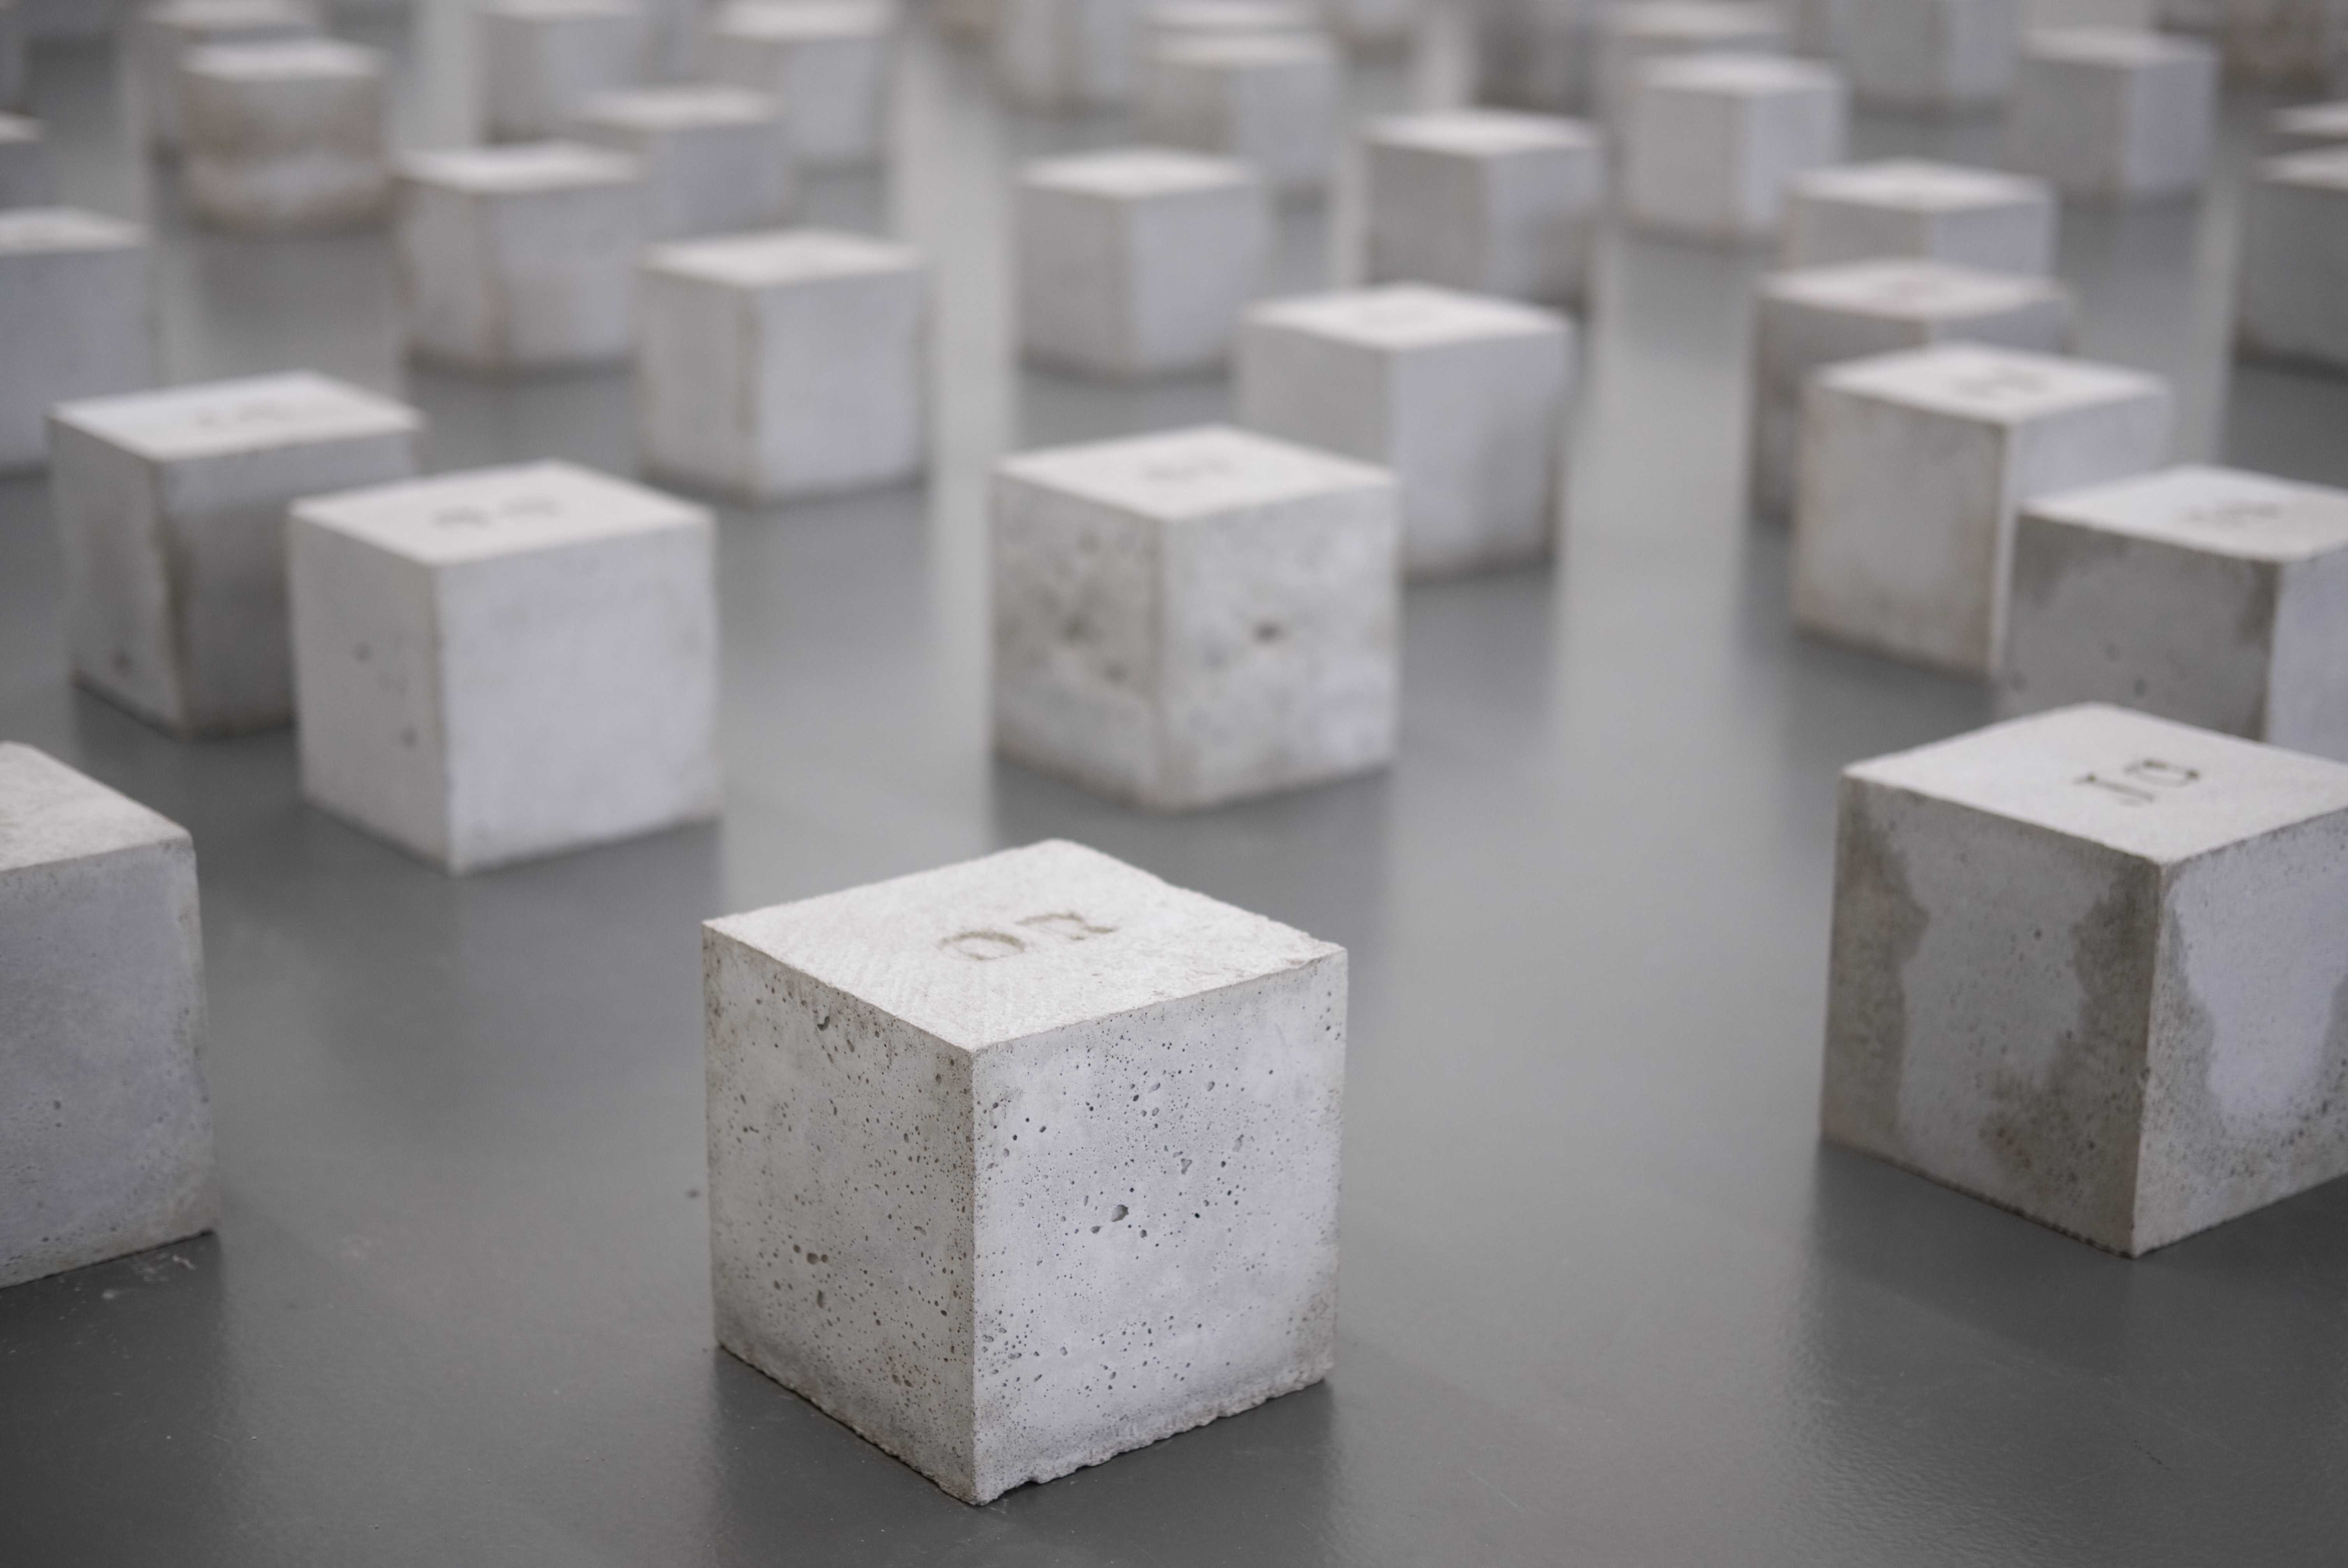 A picture of multiple concrete cubes aligned in a grid